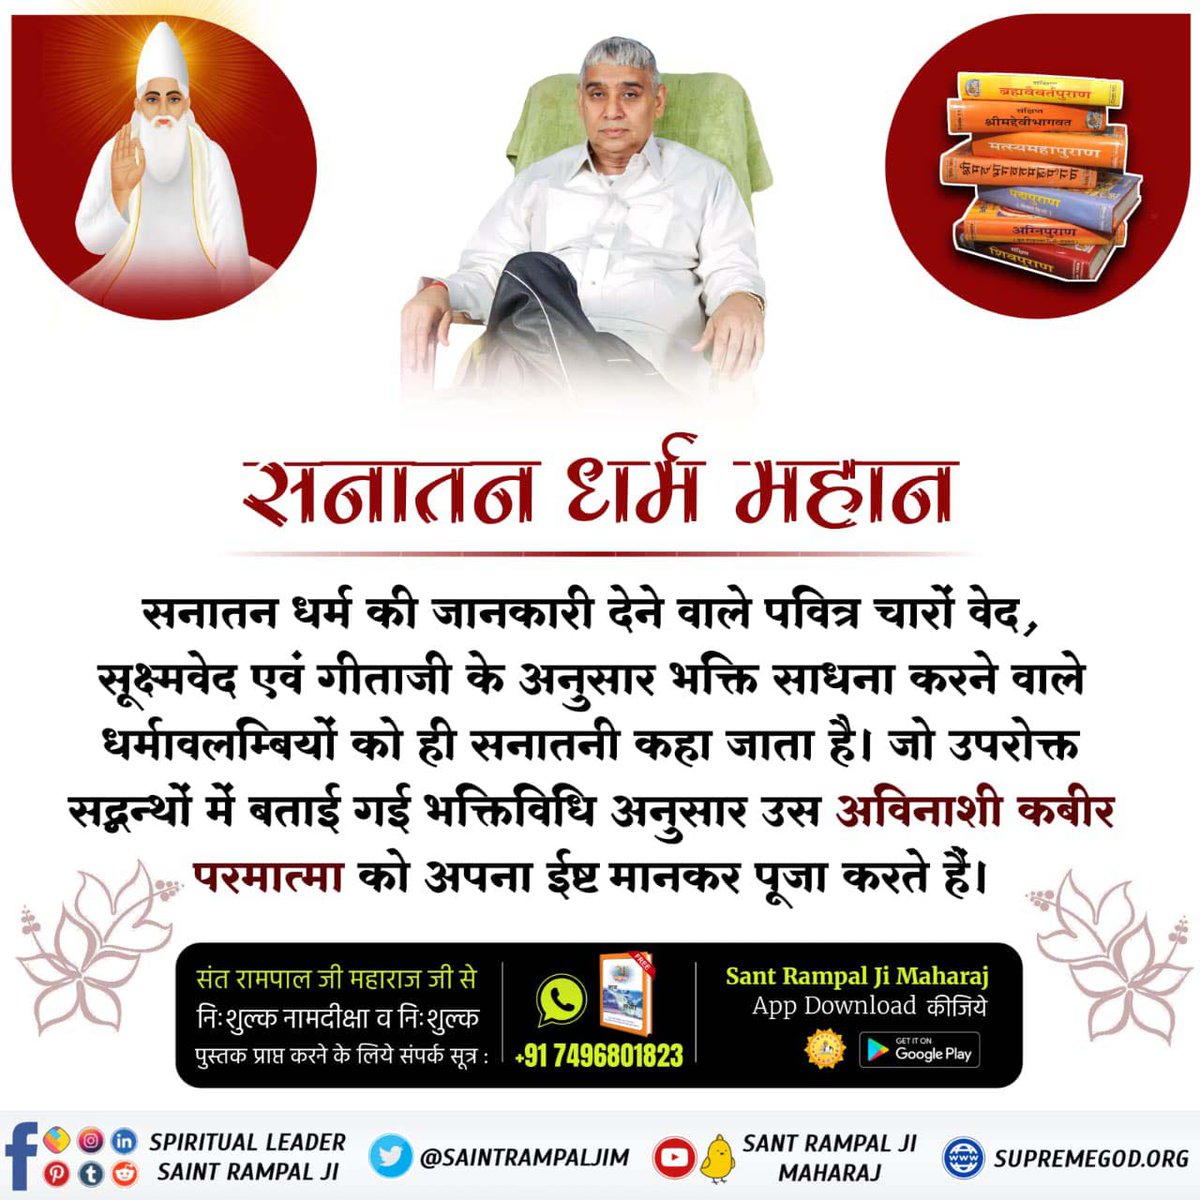 #आओ_जानें_सनातन_को
Fake spiritual gurus have knowledge contrary to Sanatan Dharma.They claim that the God does not increase a devotee's lifespan. 
 Rigveda Mandal 9 Sukta 80 Mantra 2 and Mandal 10 Sukta 161 Mantra 2, to affirm that the Supreme God can extend  devotee's lifespan